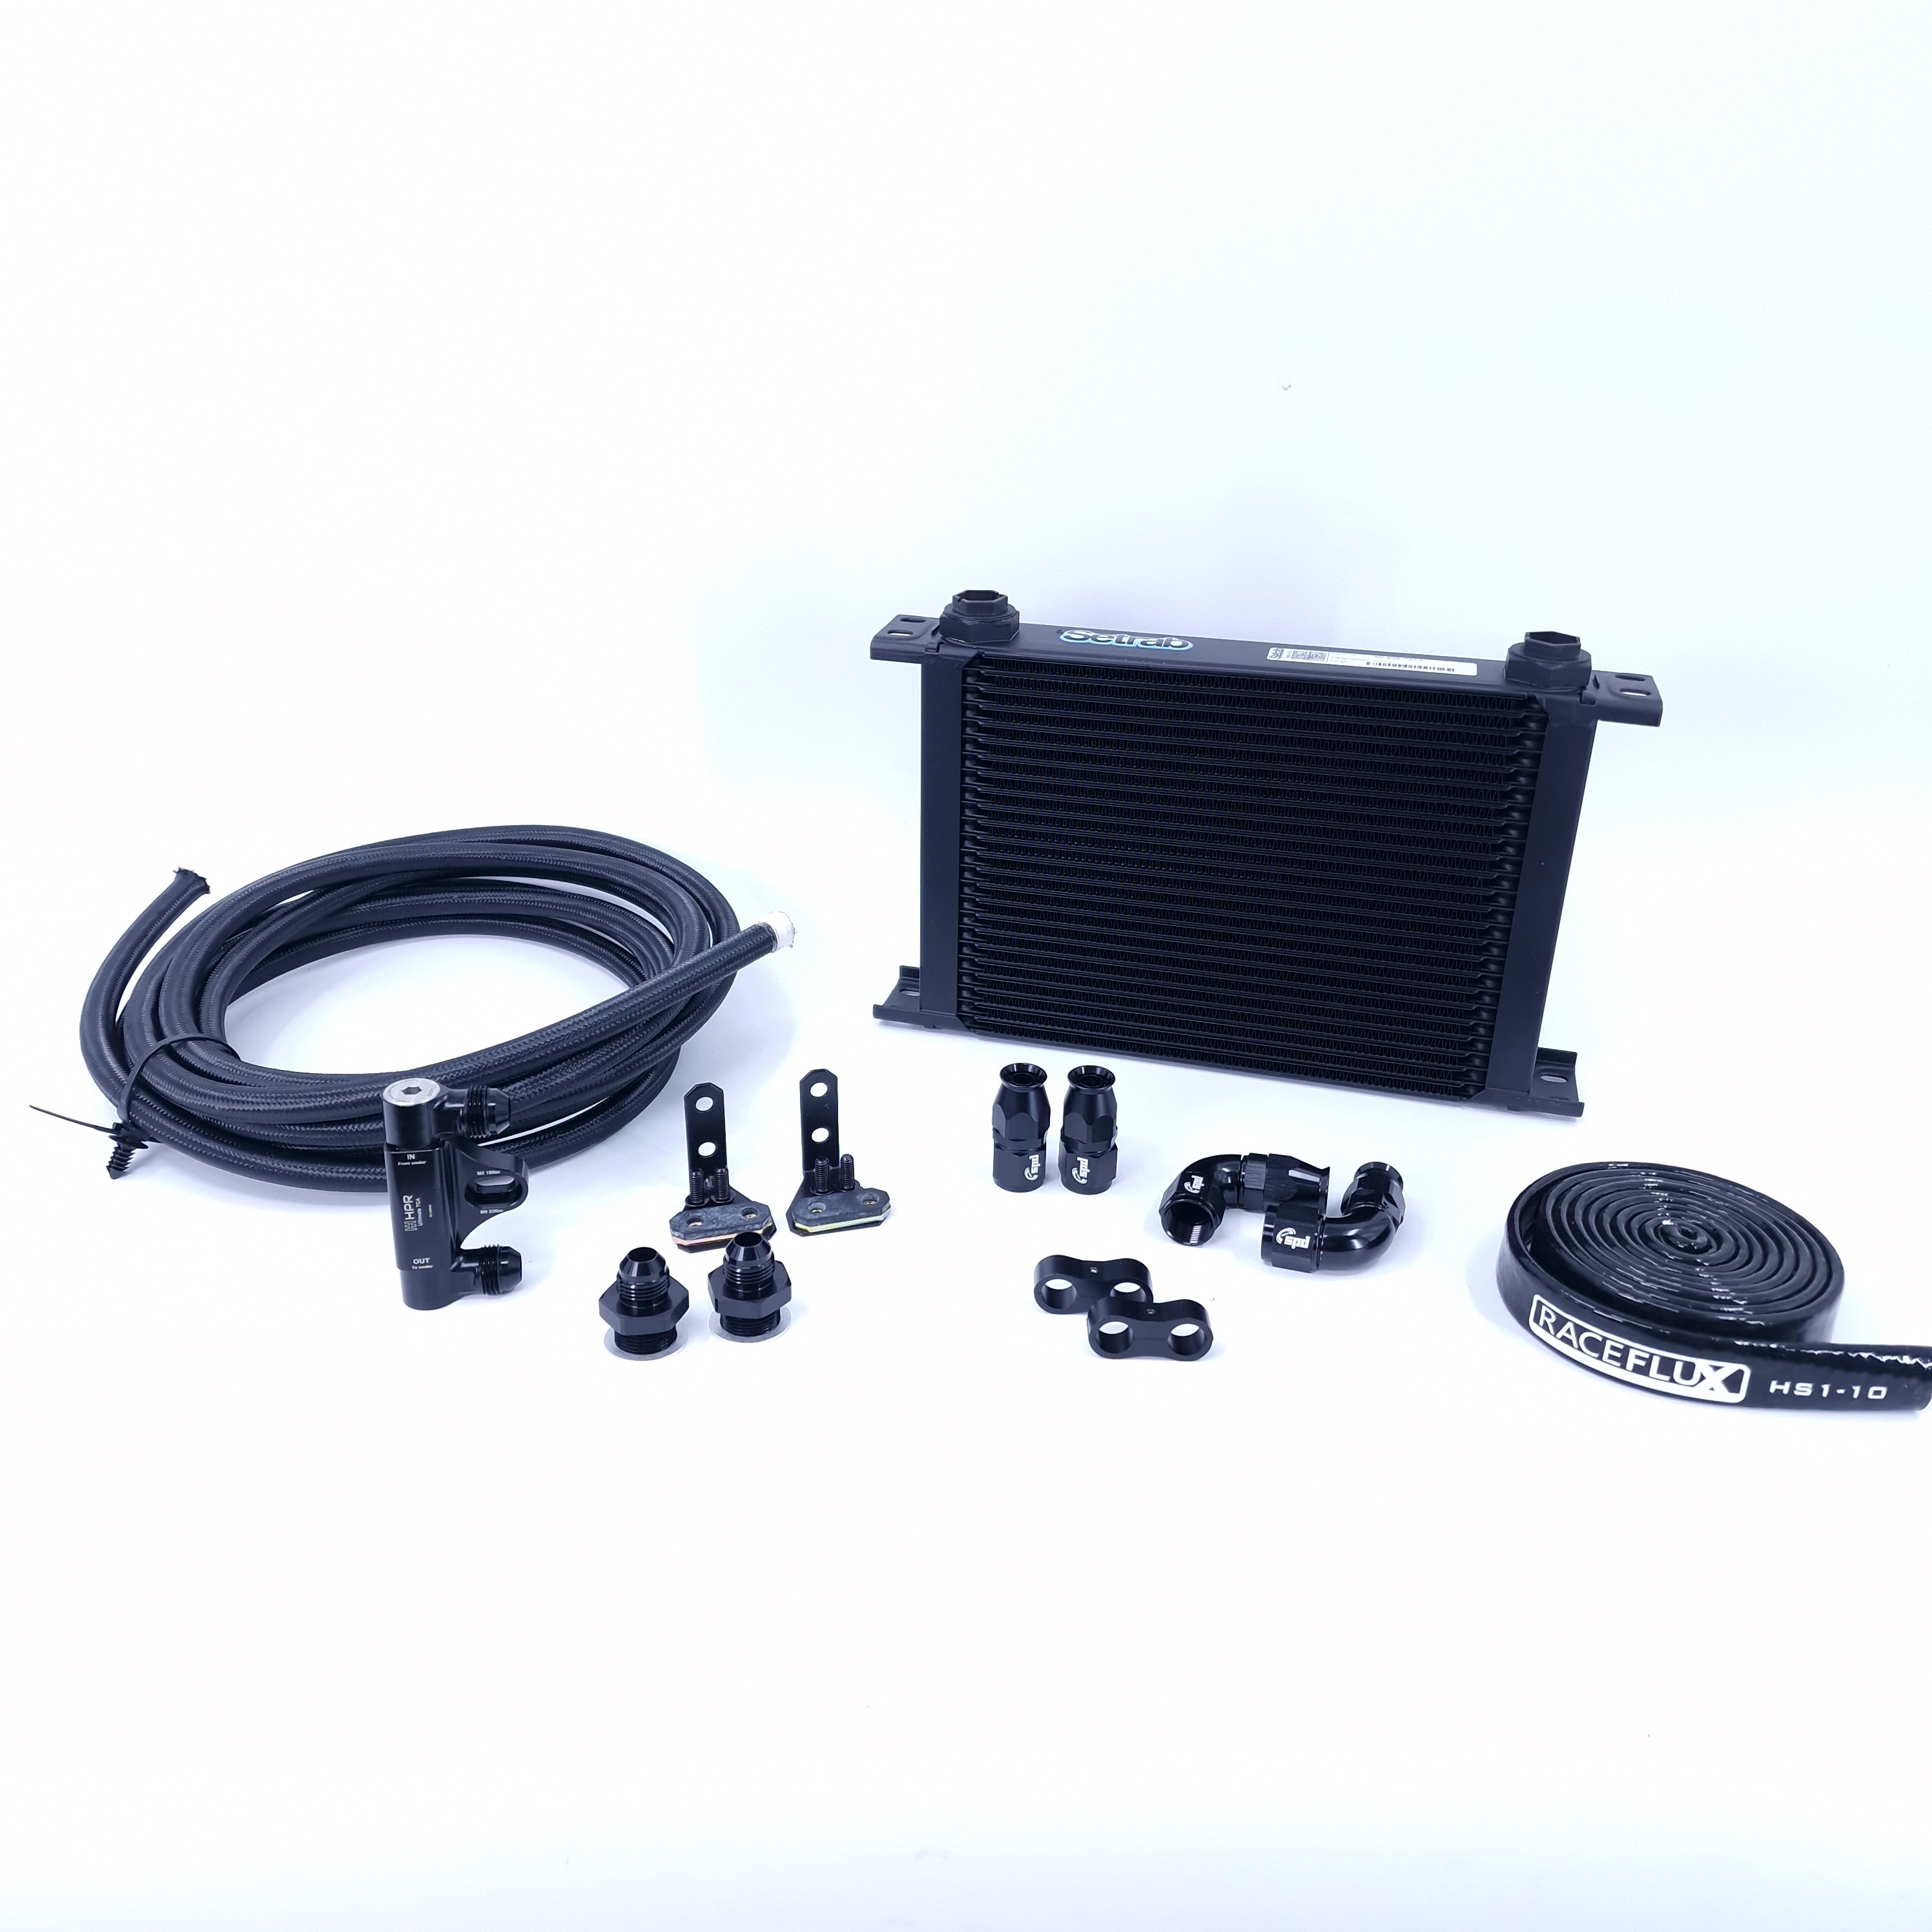 Build you Complete DCT vehicle kit | Transmission | Controller & wiring | Accesories | all included